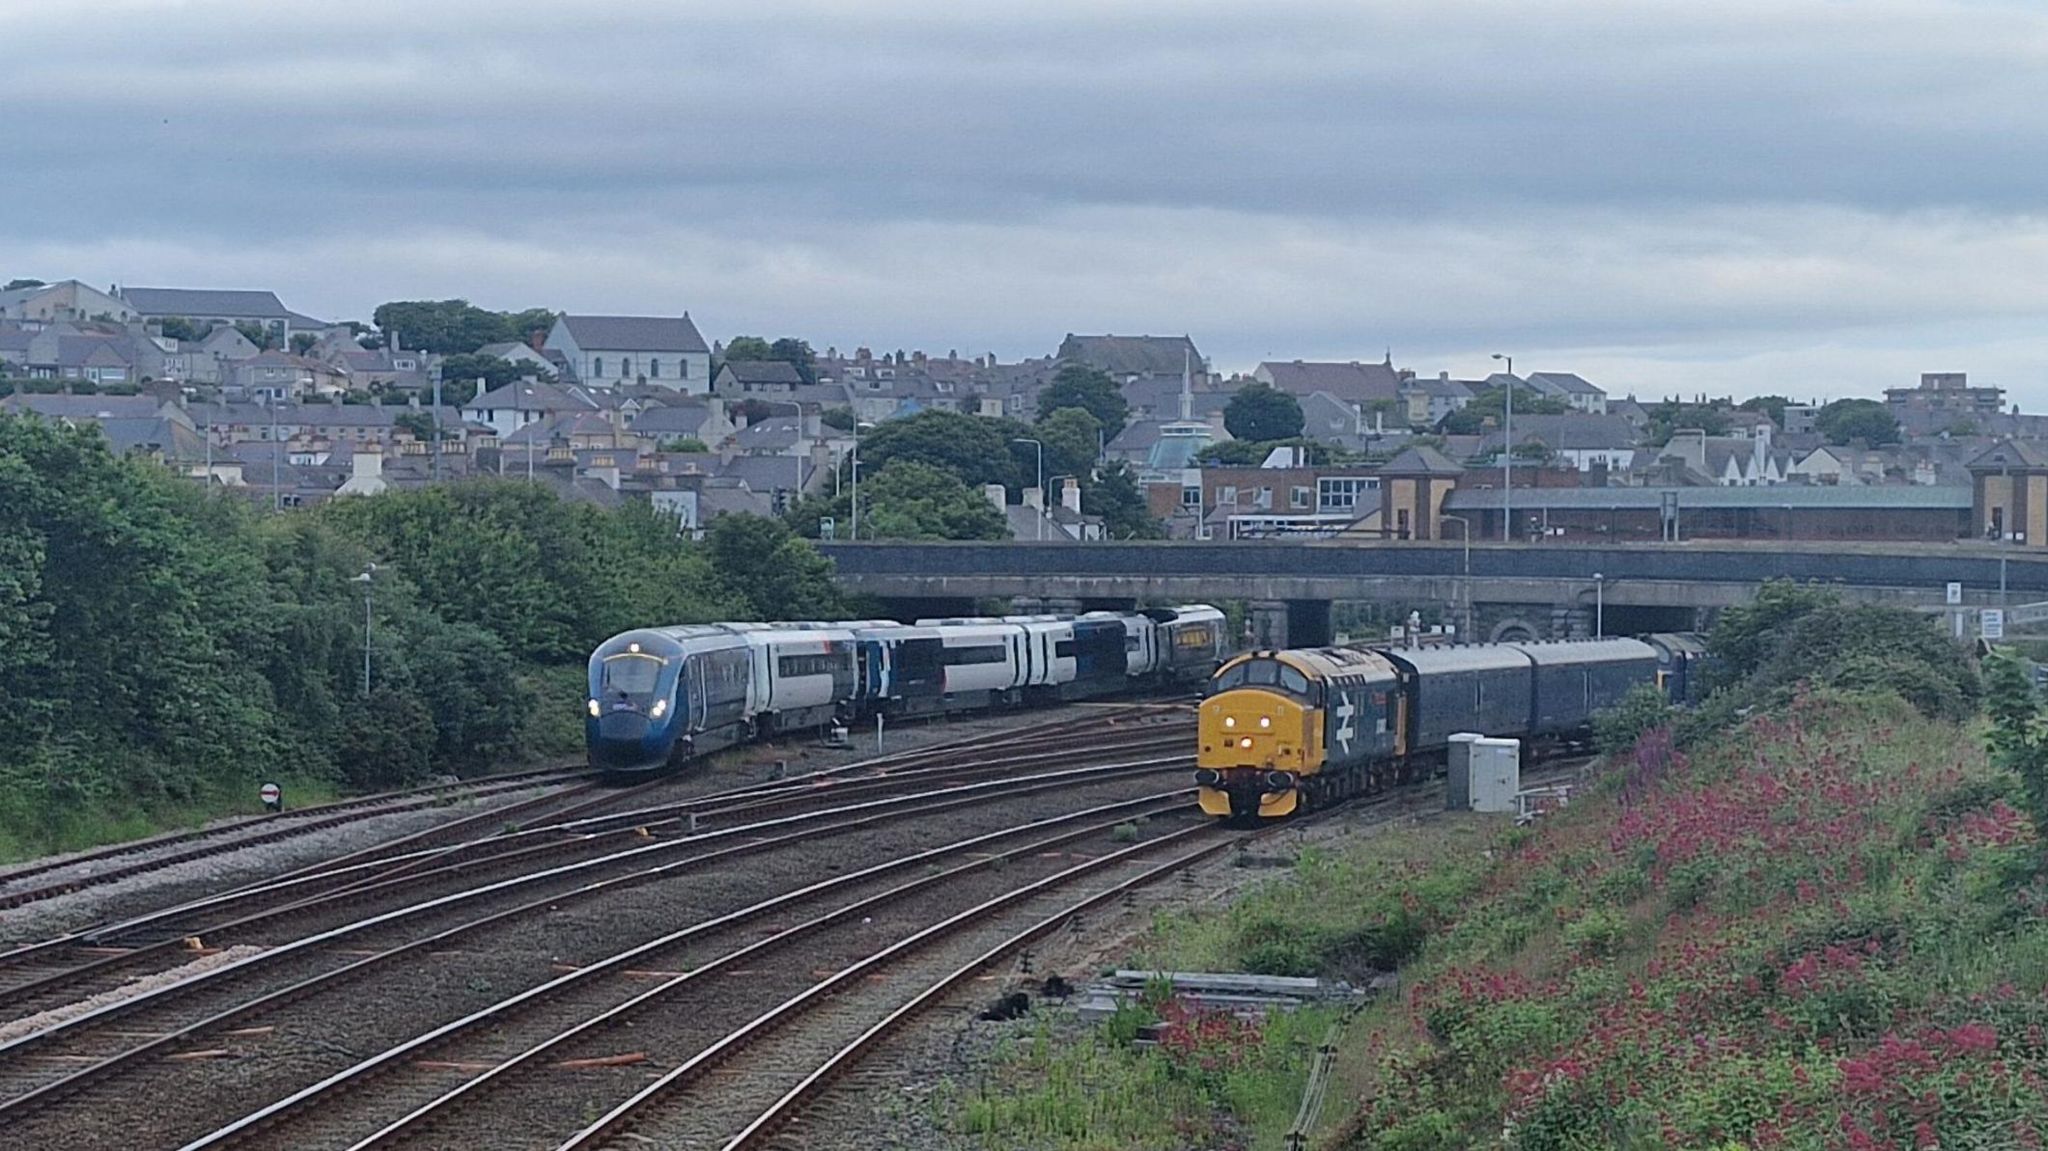 Five track main line at the entrance to Holyhead station with train leaving for Crewe on left and the locomotive from the cancelled train on the right